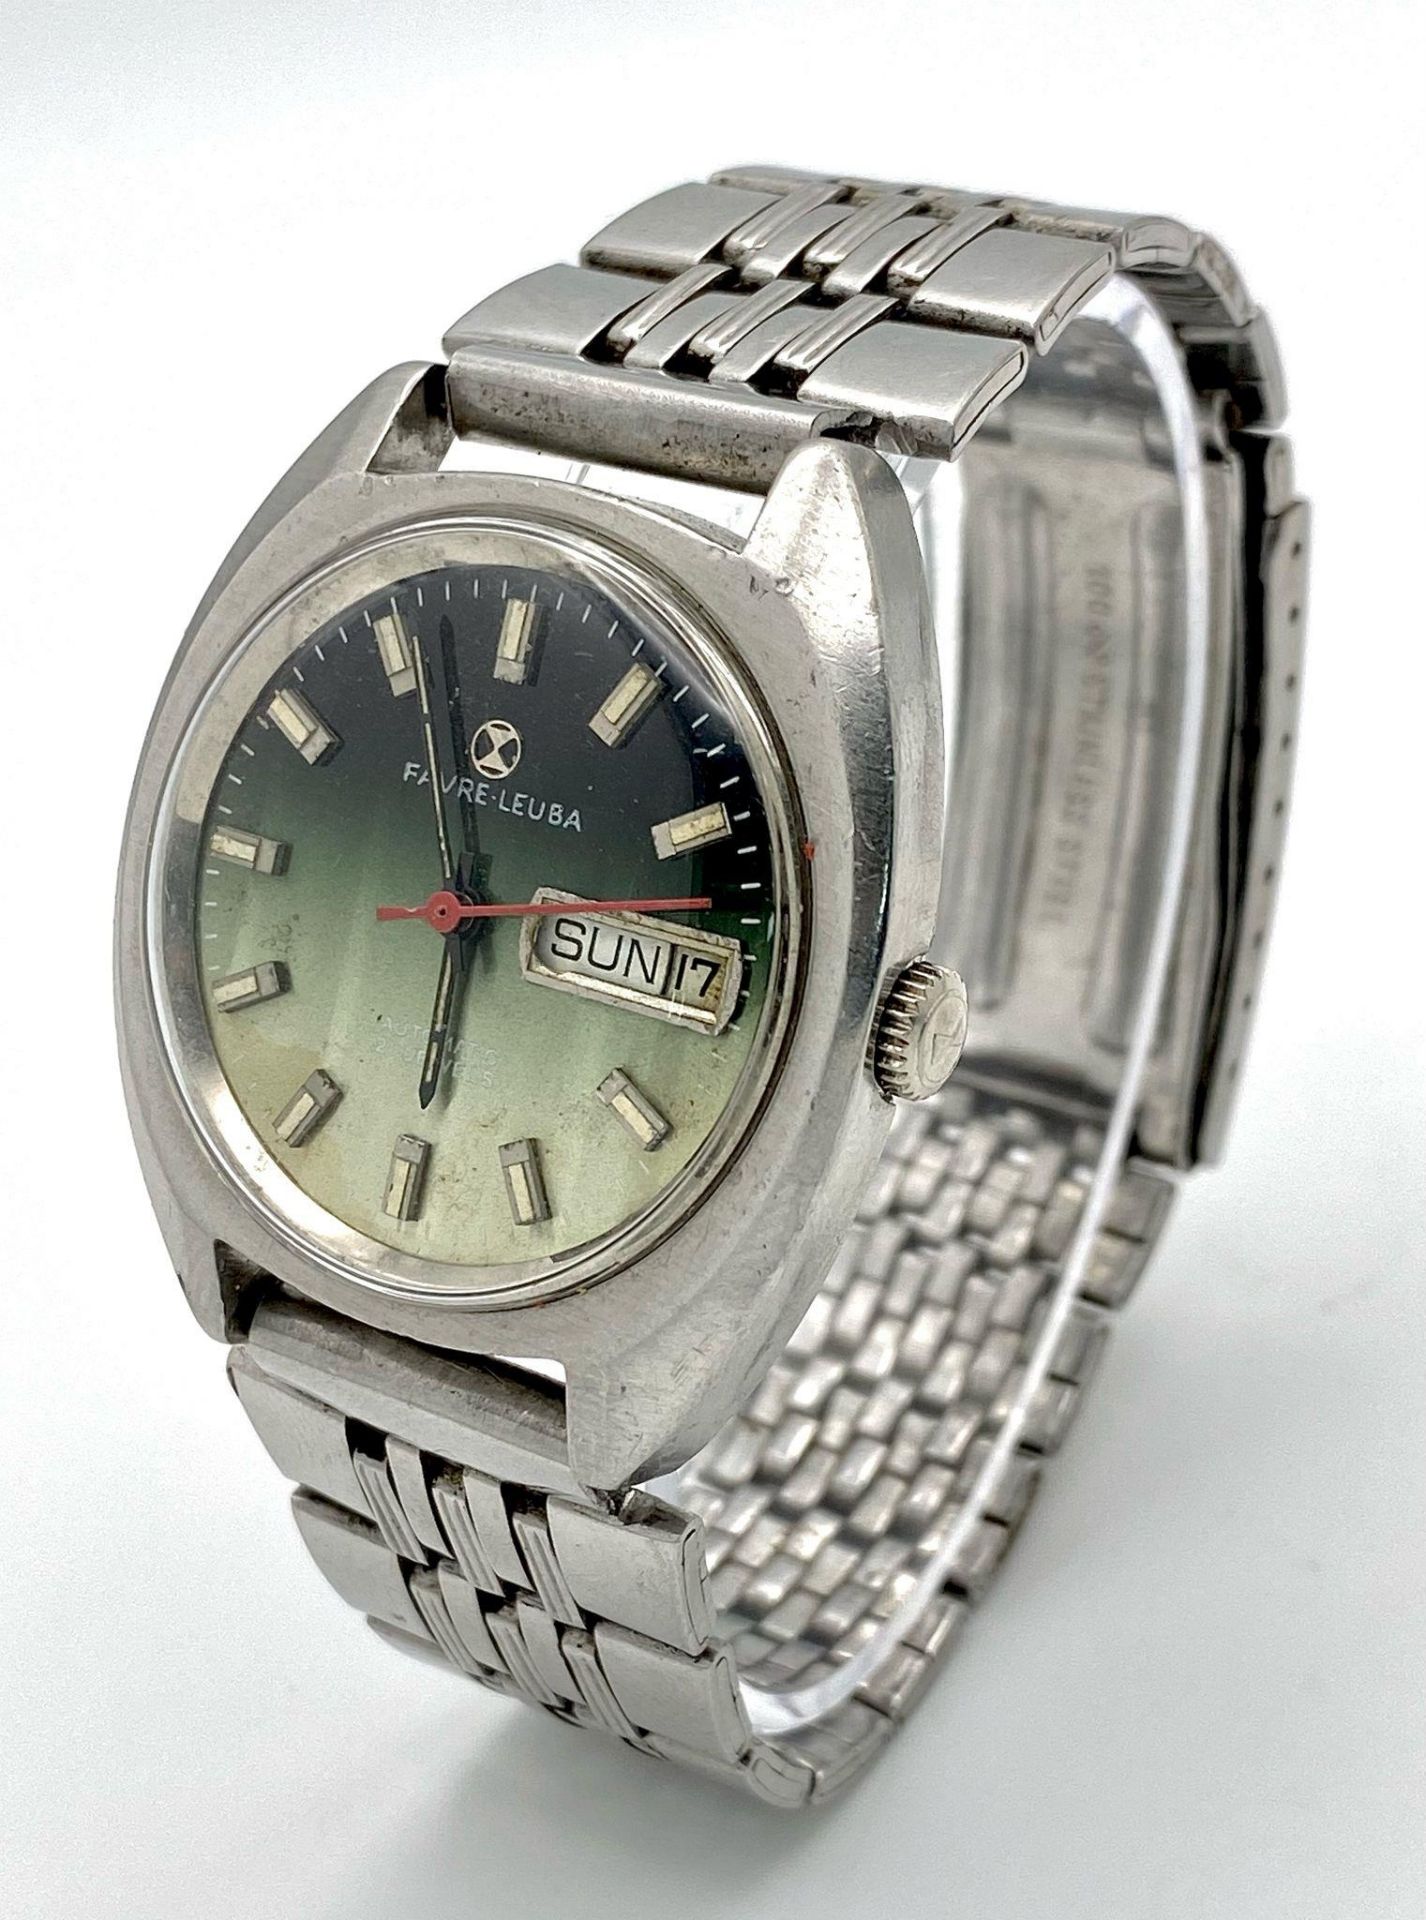 A Vintage Favre Leuba Automatic Gents Watch. Stainless steel bracelet and case - 37mm. Green dial